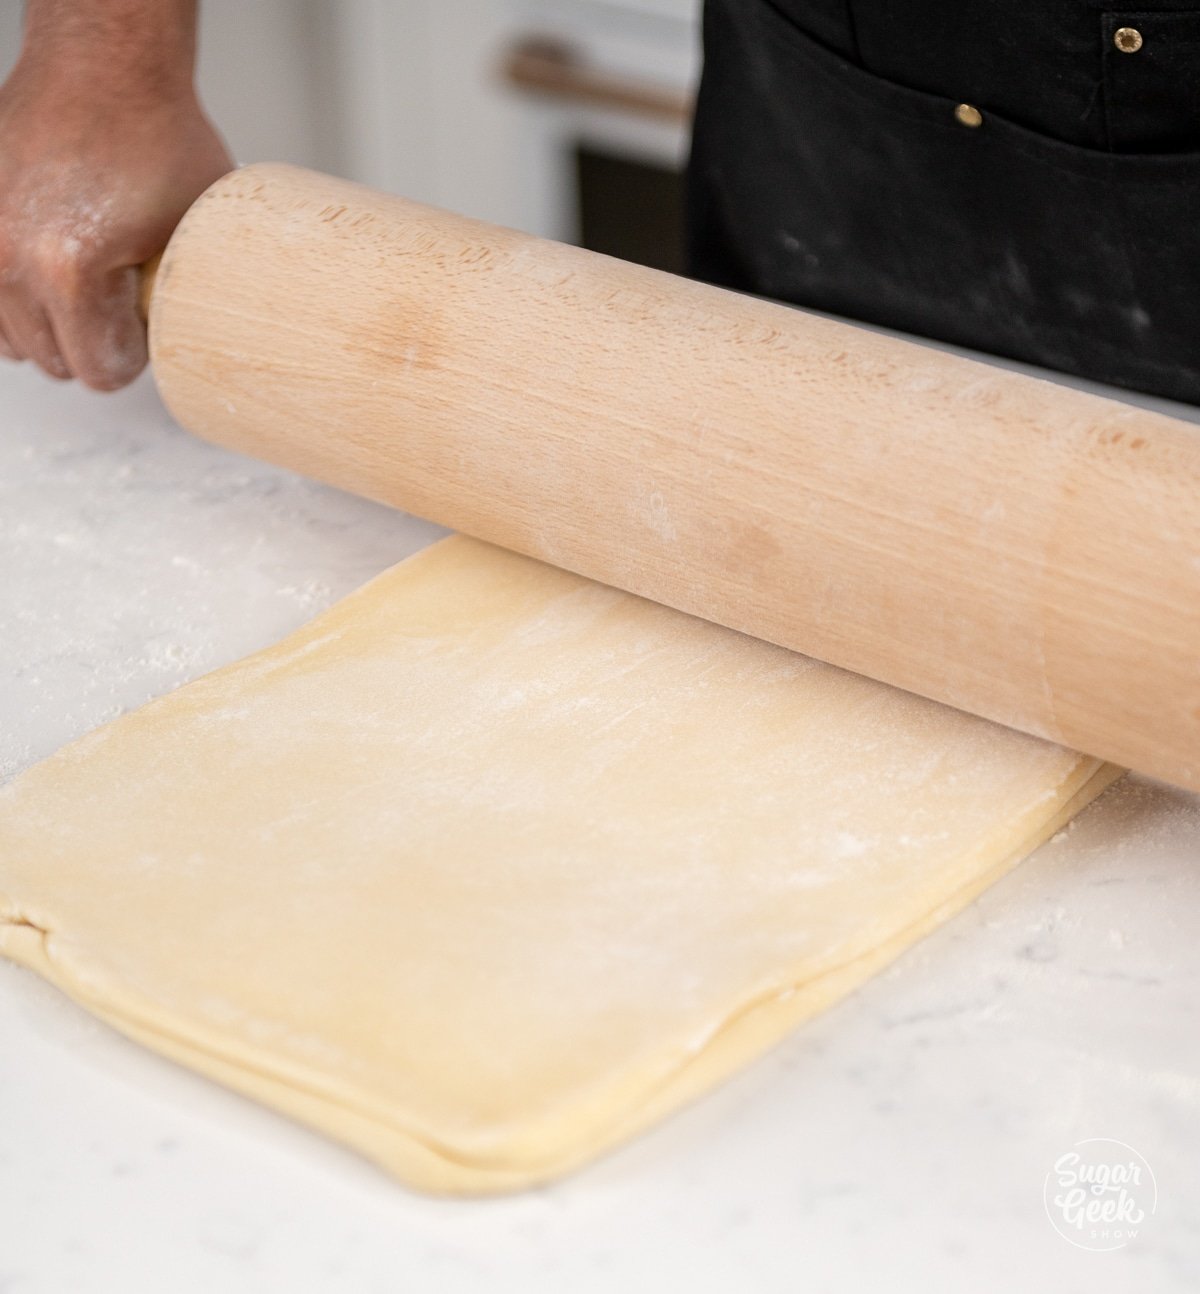 wooden rolling pin rolling croissant dough